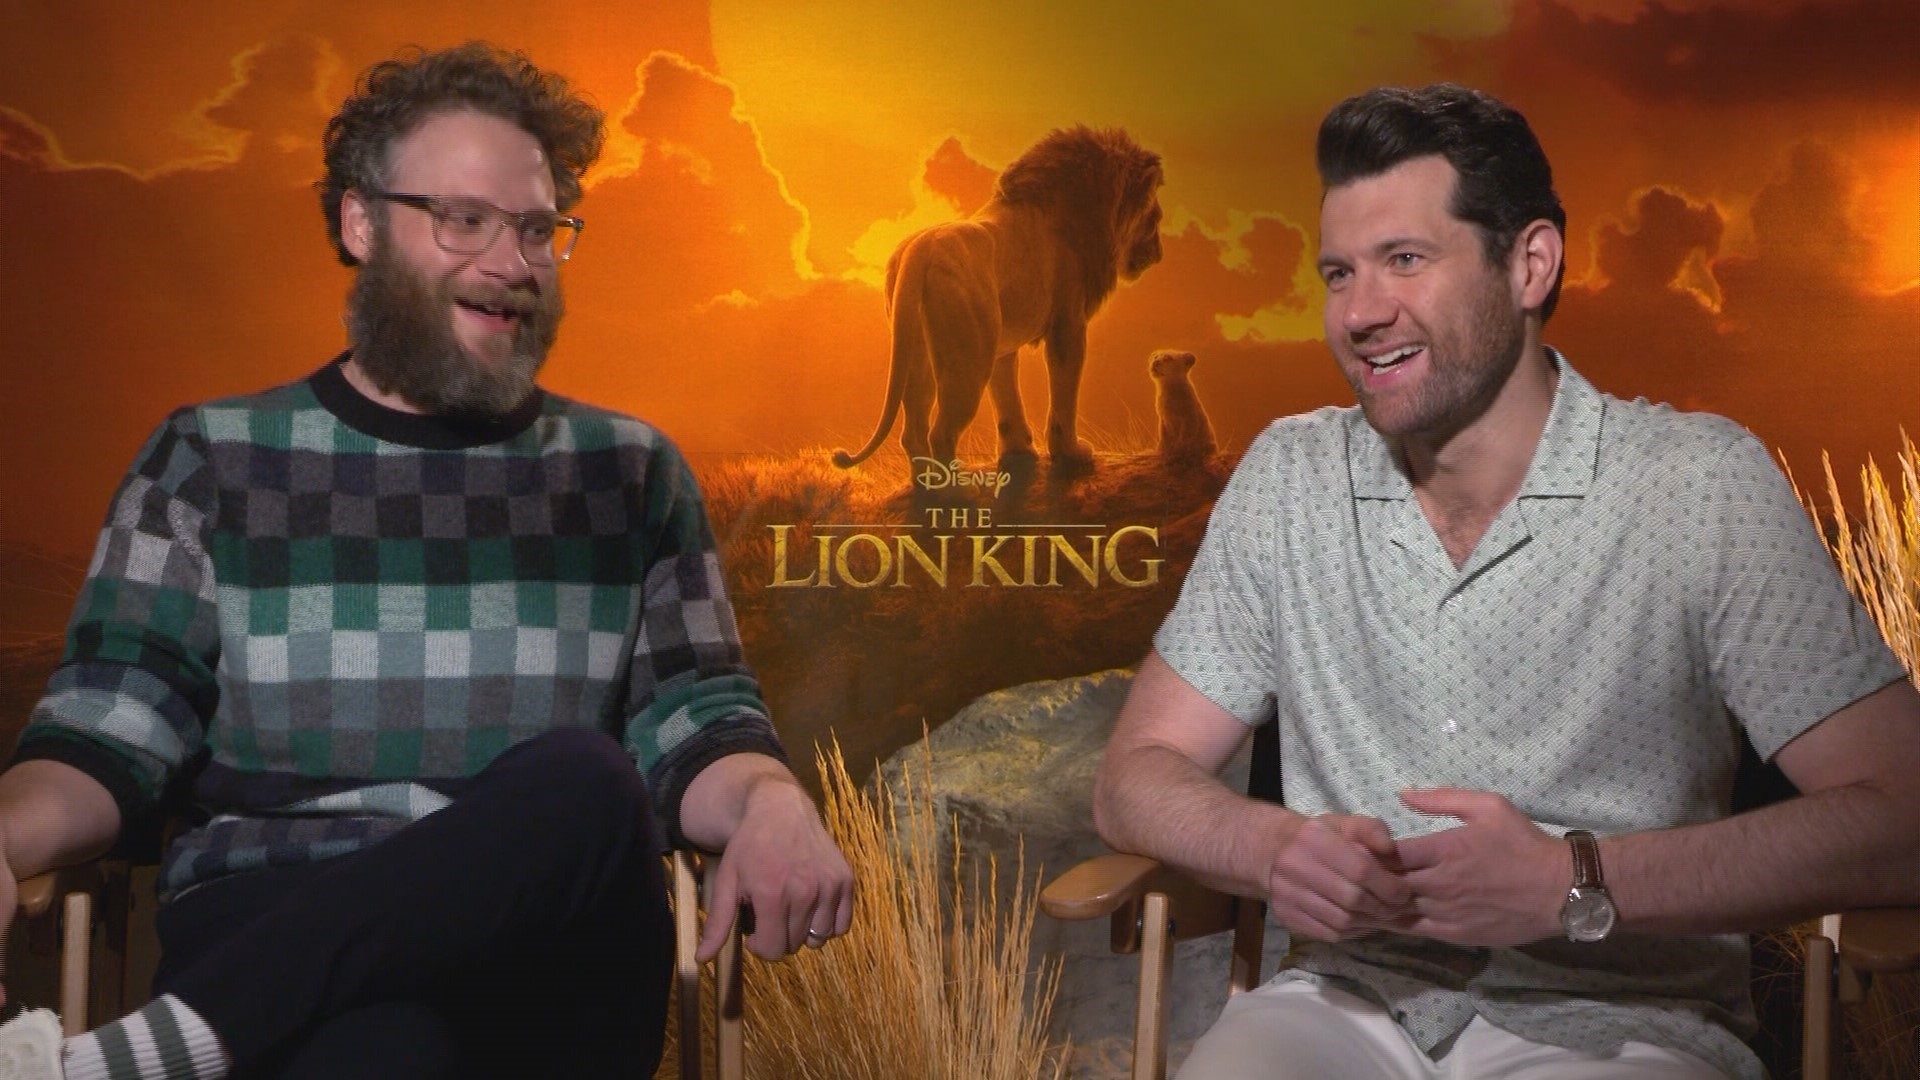 Billy Eichner and Seth Rogen shine as comedy duo in Disney's 'The Lion King'  remake